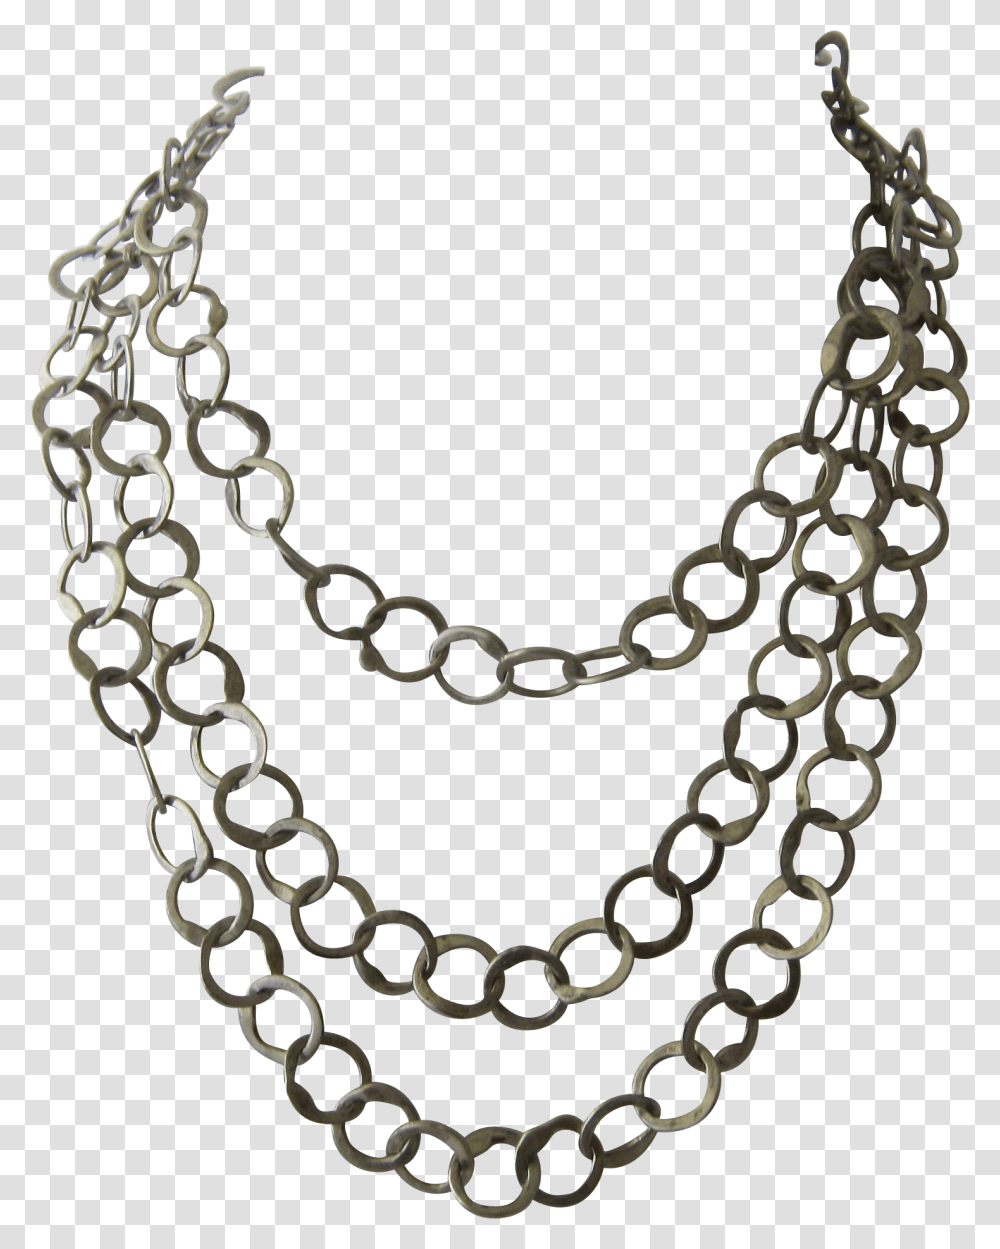 Gold Money Chain Background Chain Pngs, Necklace, Jewelry, Accessories, Accessory Transparent Png